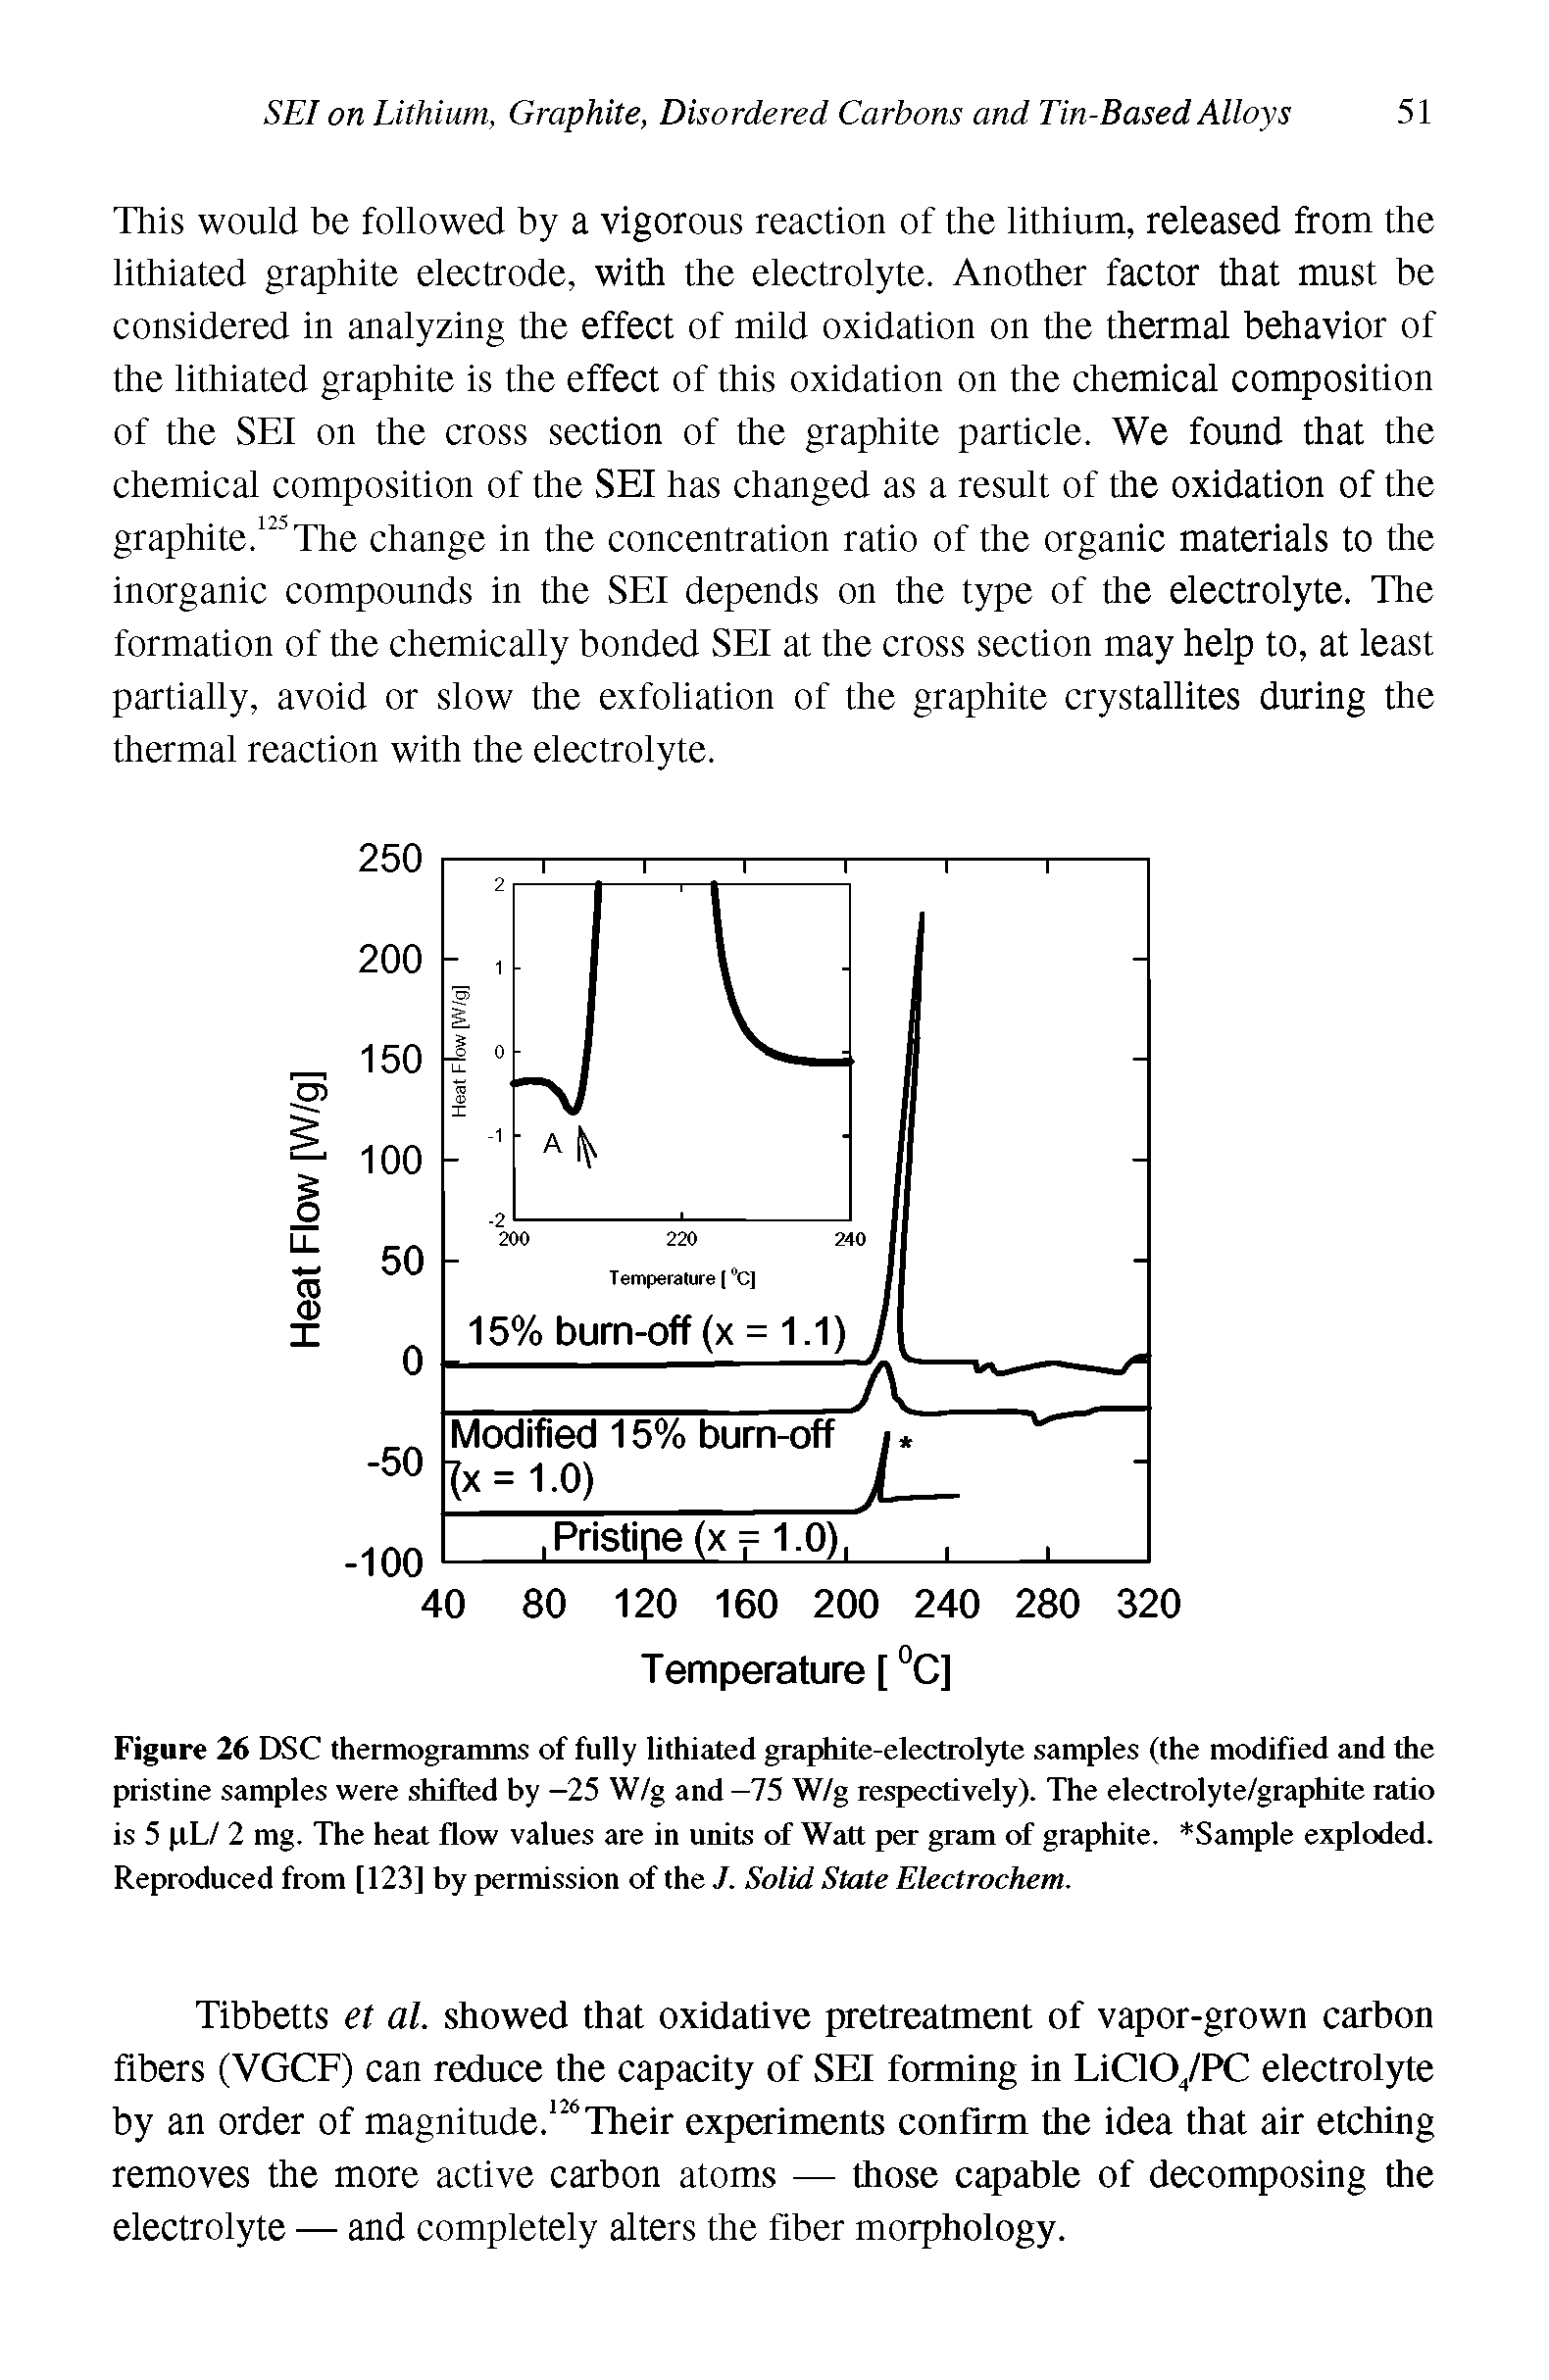 Figure 26 DSC thermogramms of fully lithiated grajAite-electrolyte samples (the modified and the pristine samples were shifted by —25 W/g and —75 W/g respectively). The electrolyte/graphite ratio is 5 iL/ 2 mg. The heat flow values are in units of Watt per gram of graphite. Sample exploded. Reproduced from [123] by permission of the J. Solid State Electrochem.